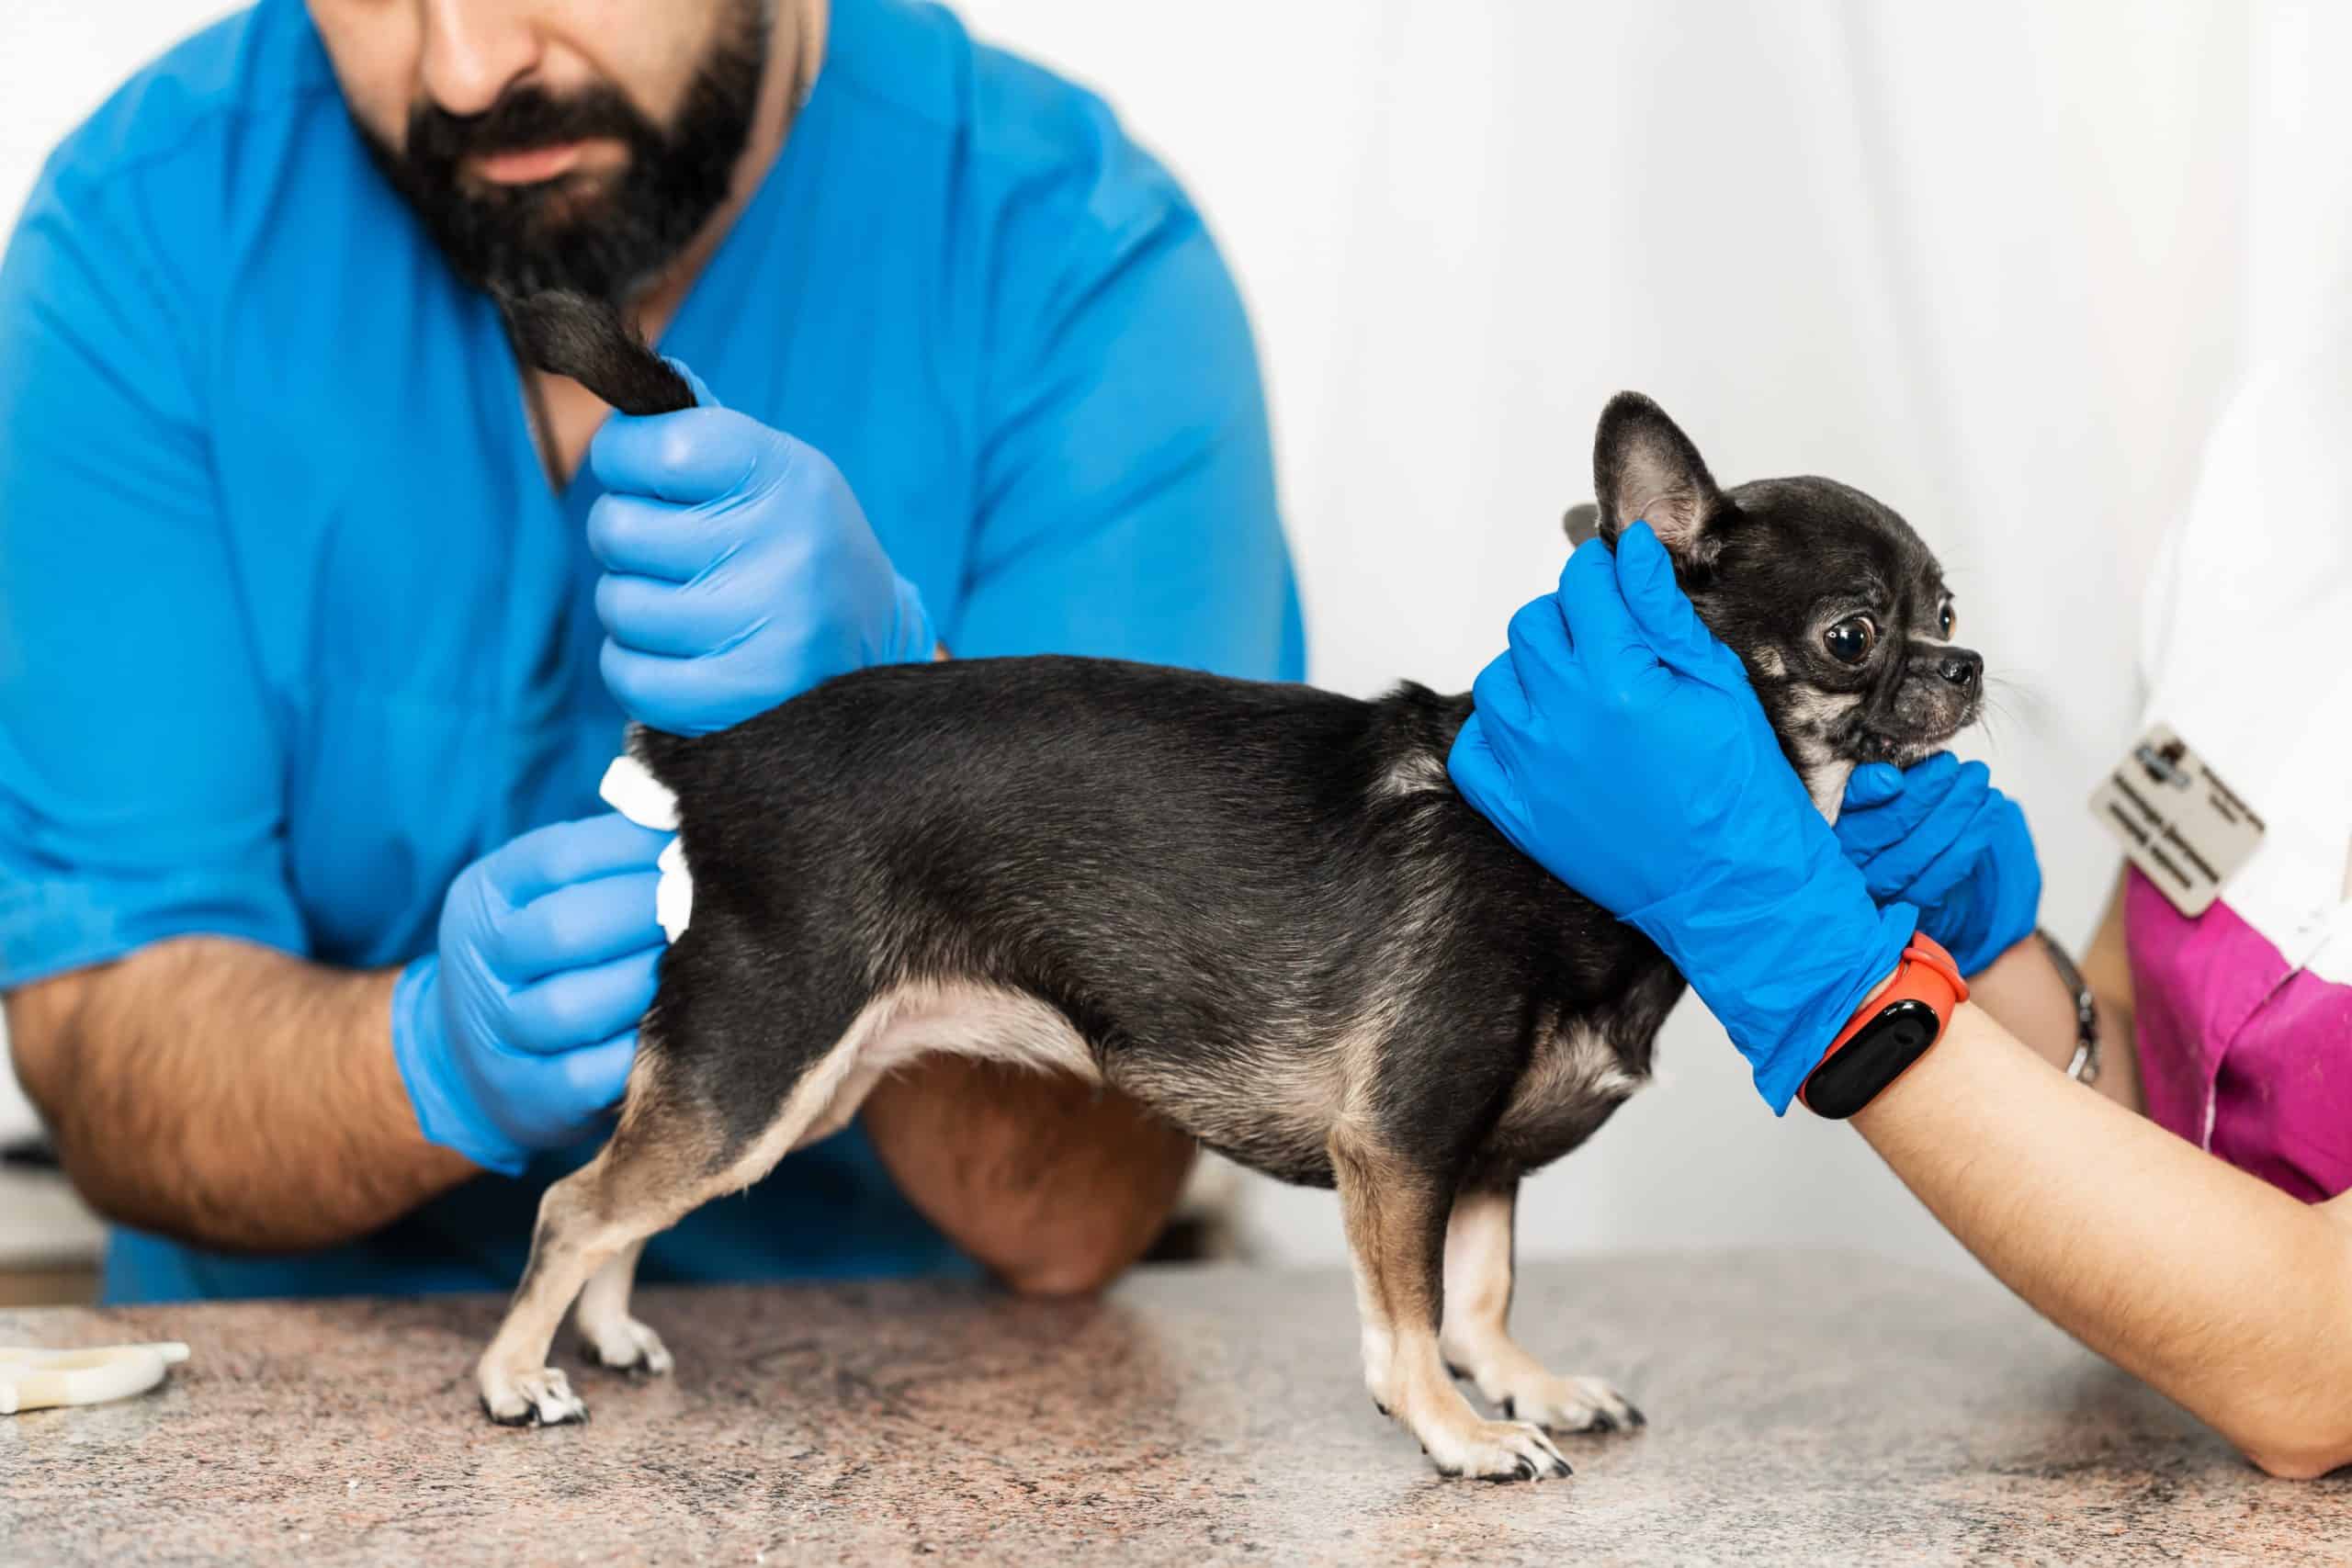 Veterinarian expresses chihuahua's anal glands.